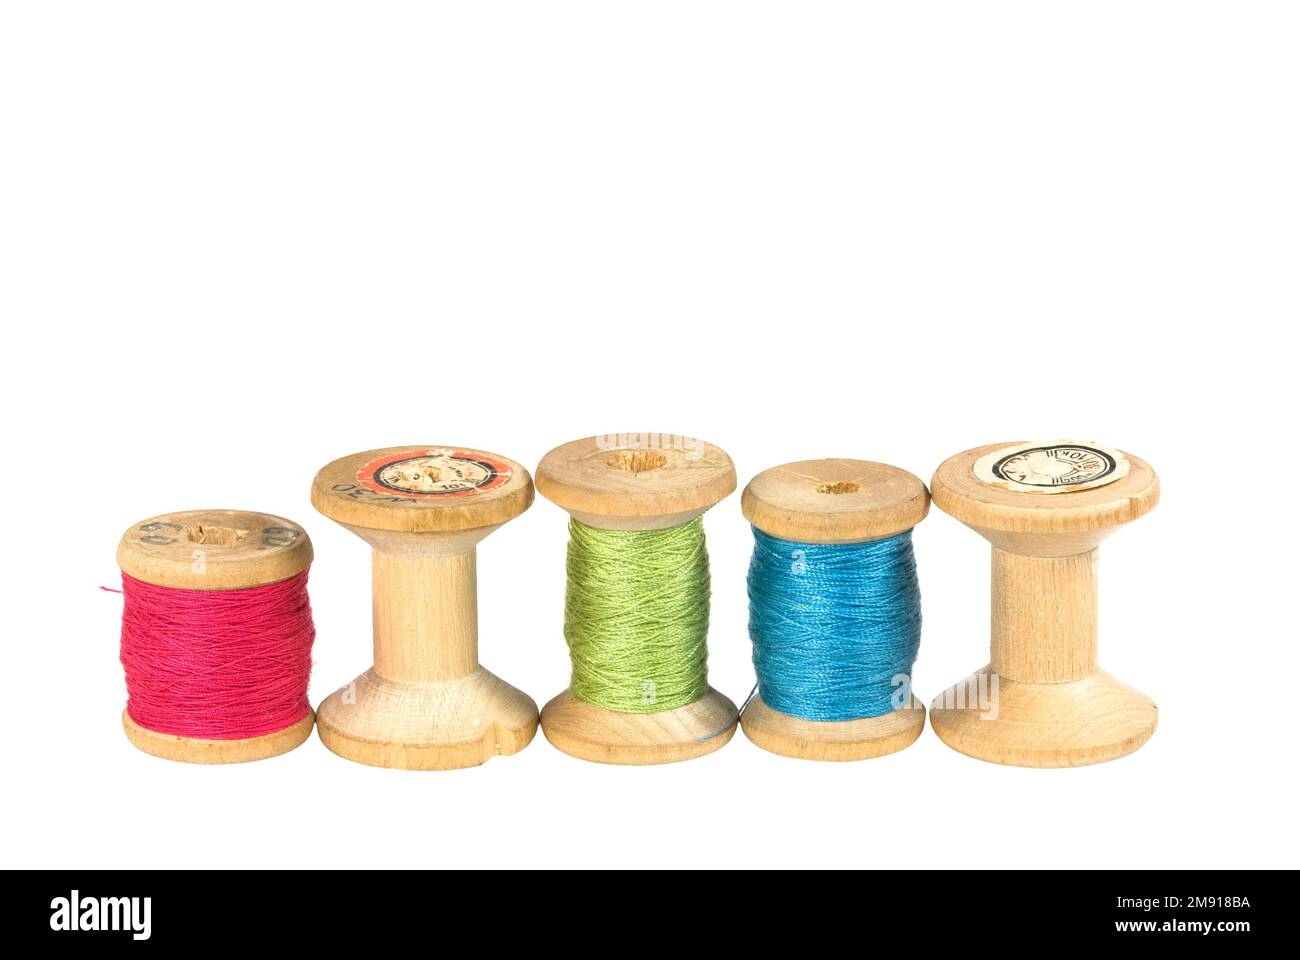 Old wooden reels of thread on white Stock Photo